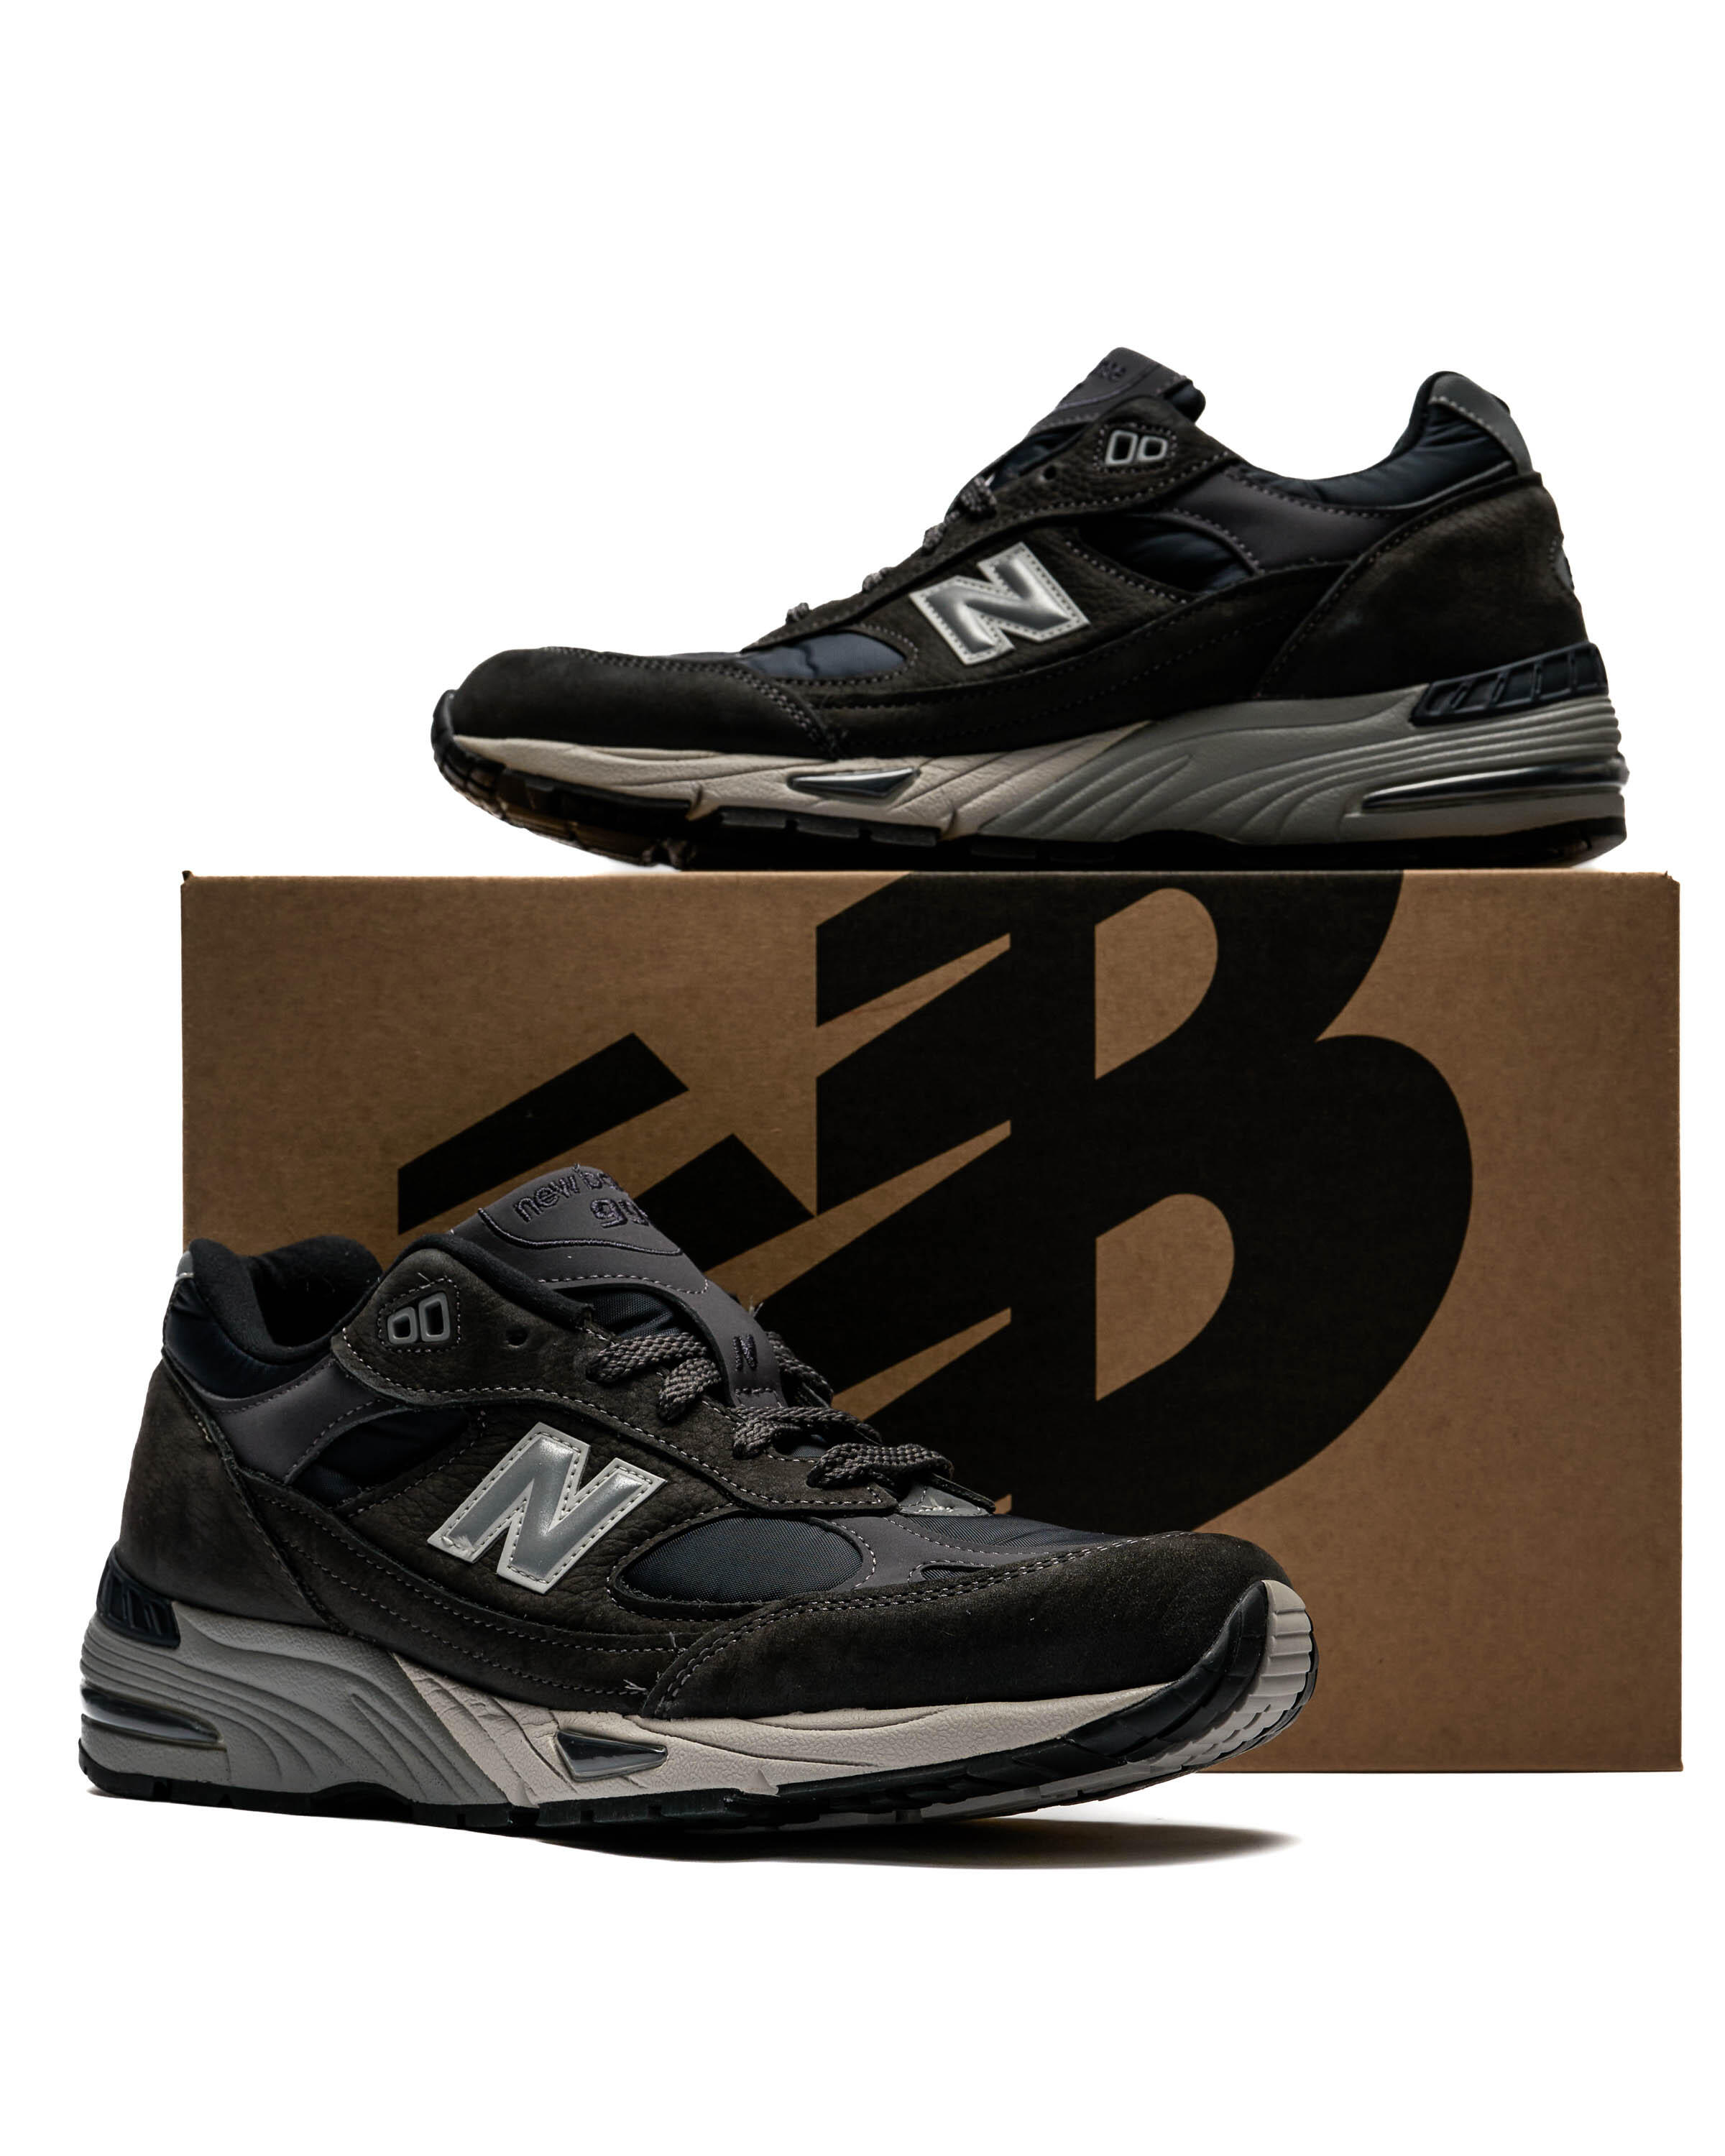 New Balance M 991 DGG - Made in England